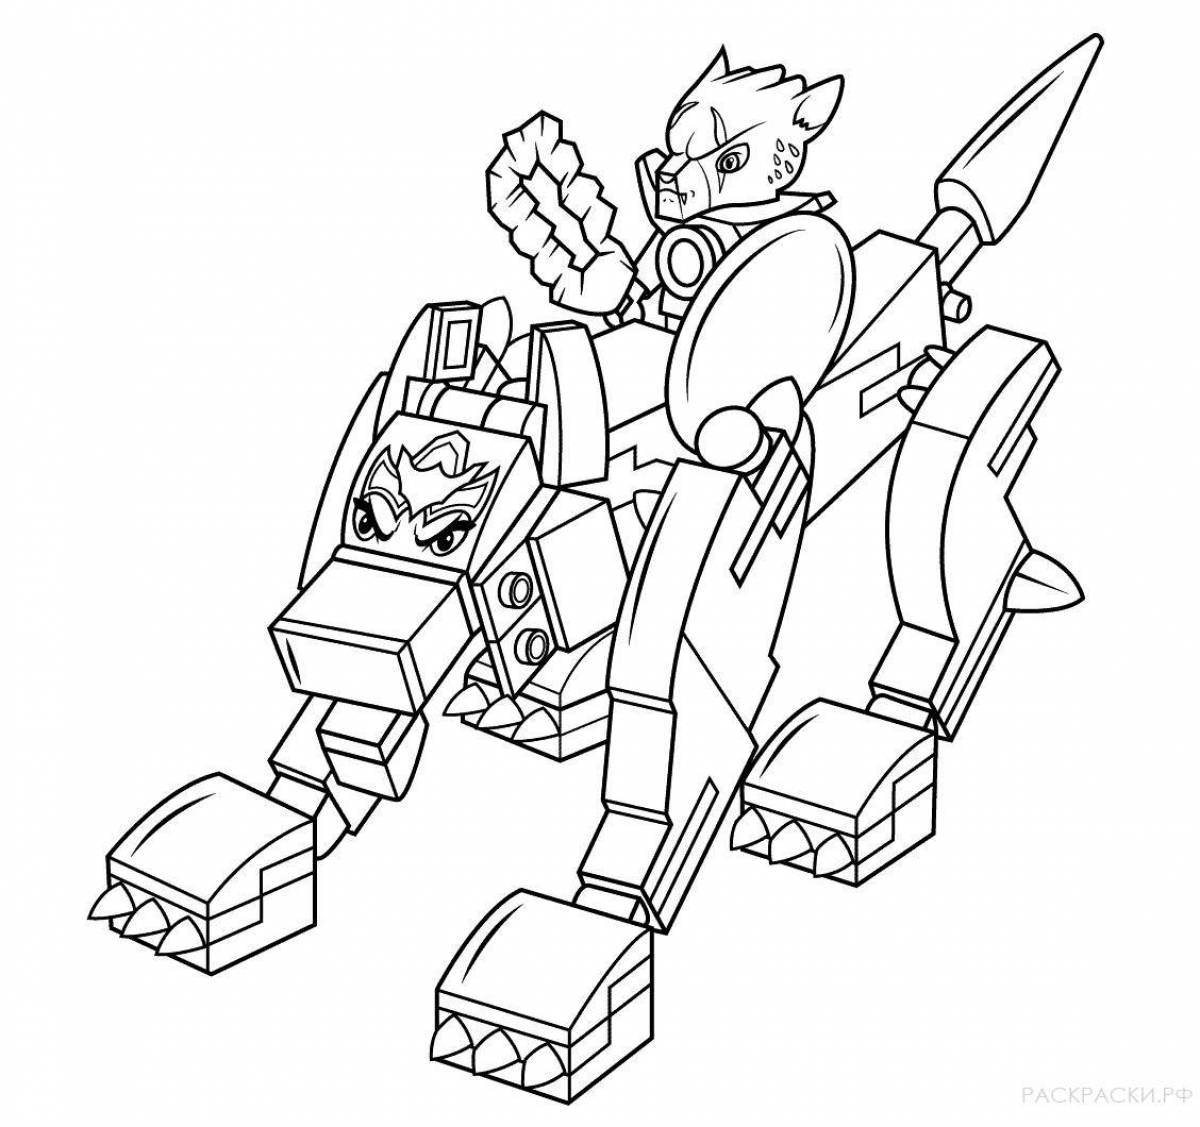 Colorful lego robot coloring page